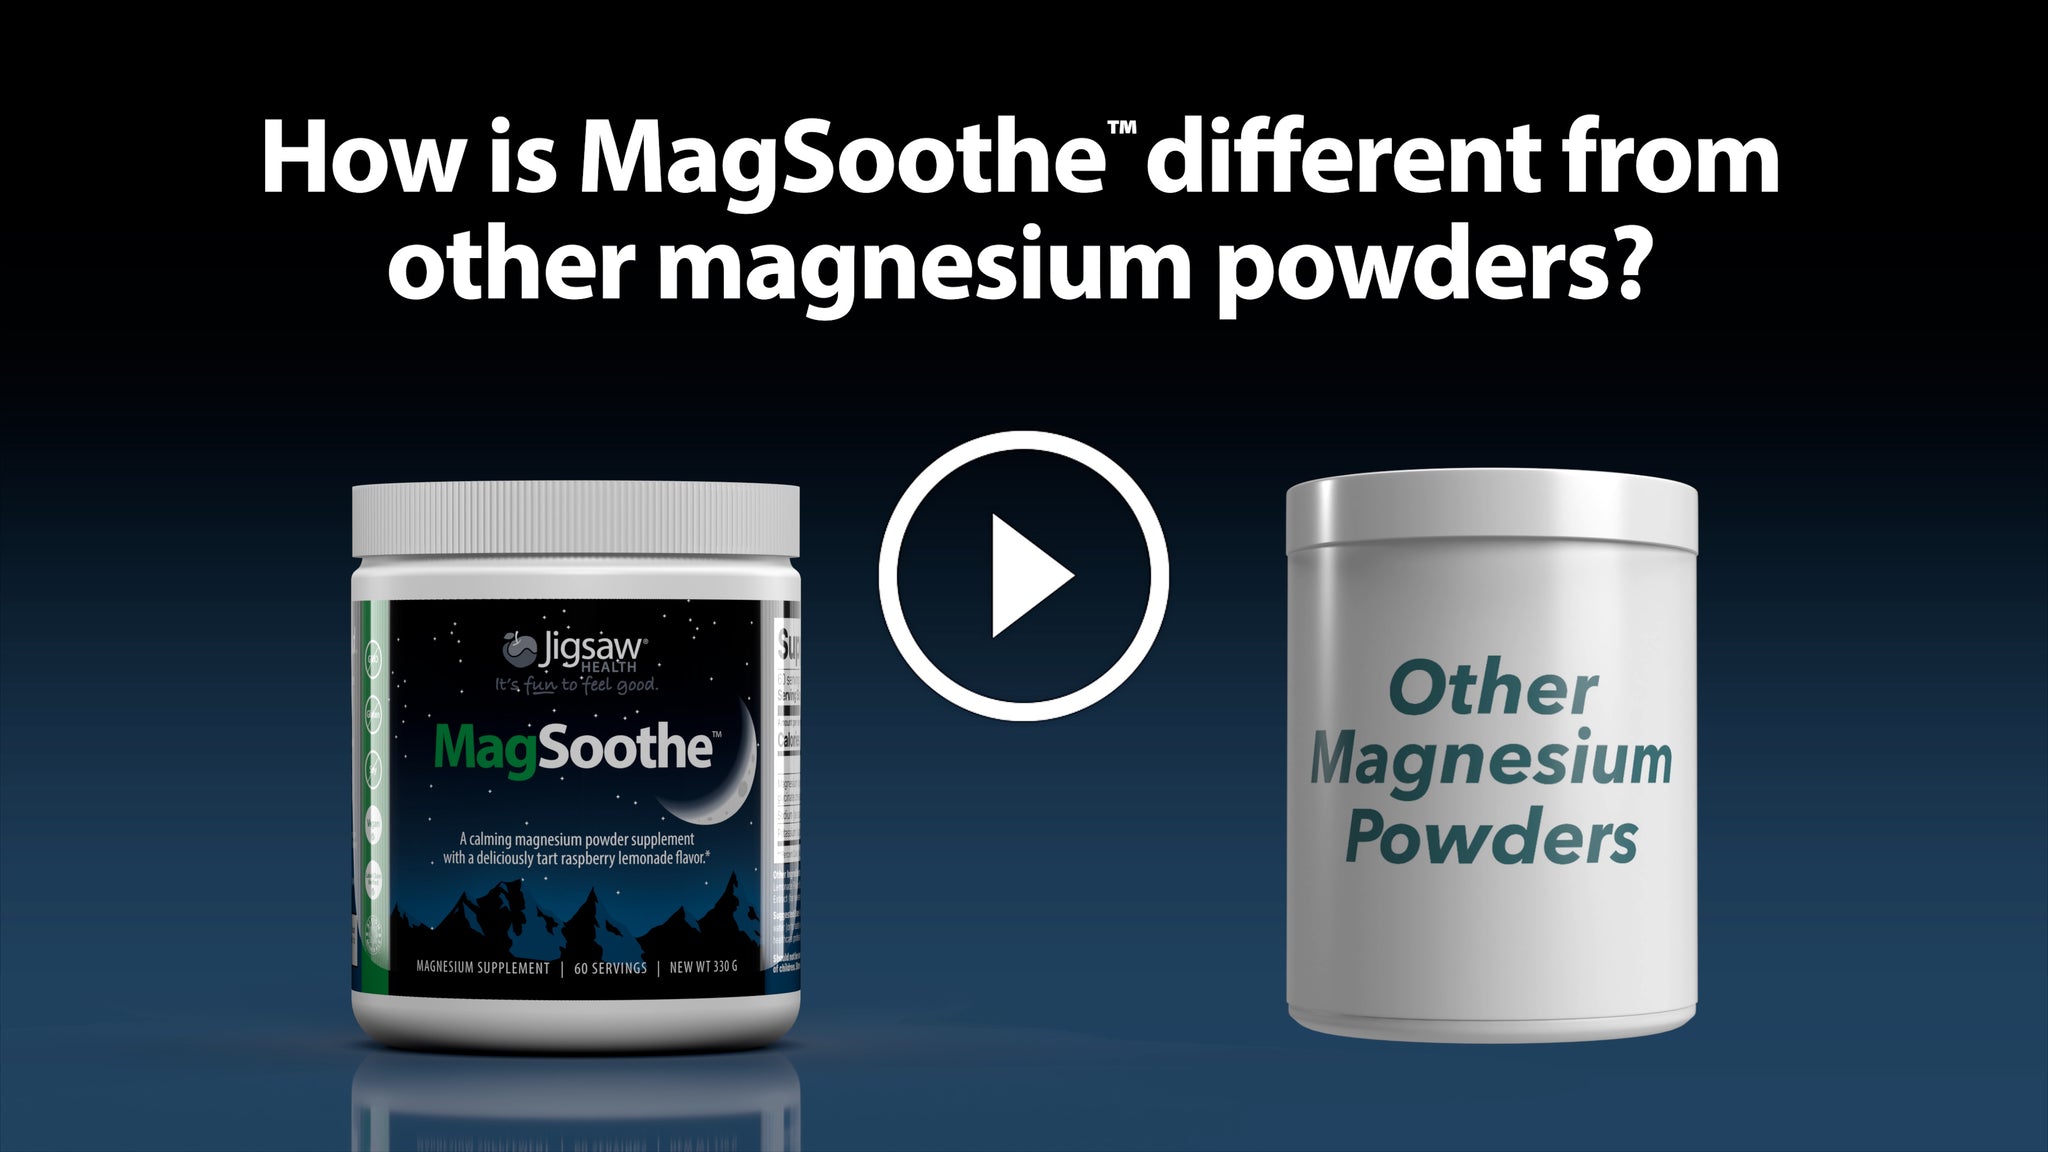 How is MagSoothe different from other magnesium powders?